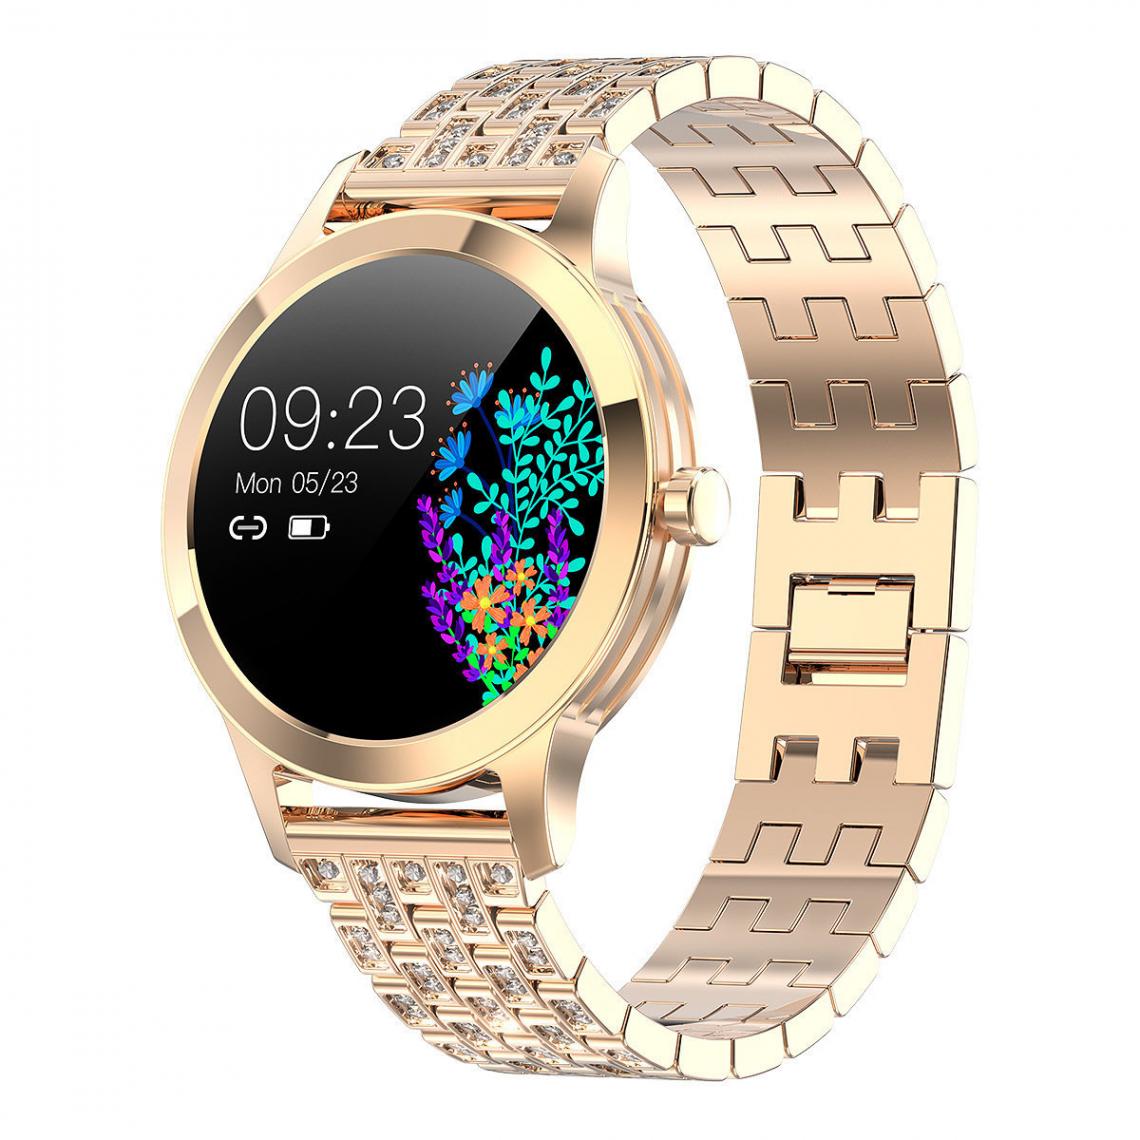 Chronotech Montres - Chronus Smart Watches for Women Iphone/Android Compatible with Round Face, Activity Trackers Menstrual Period Function Reminder, Brilliant Star Diamond Strap(gold) - Montre connectée